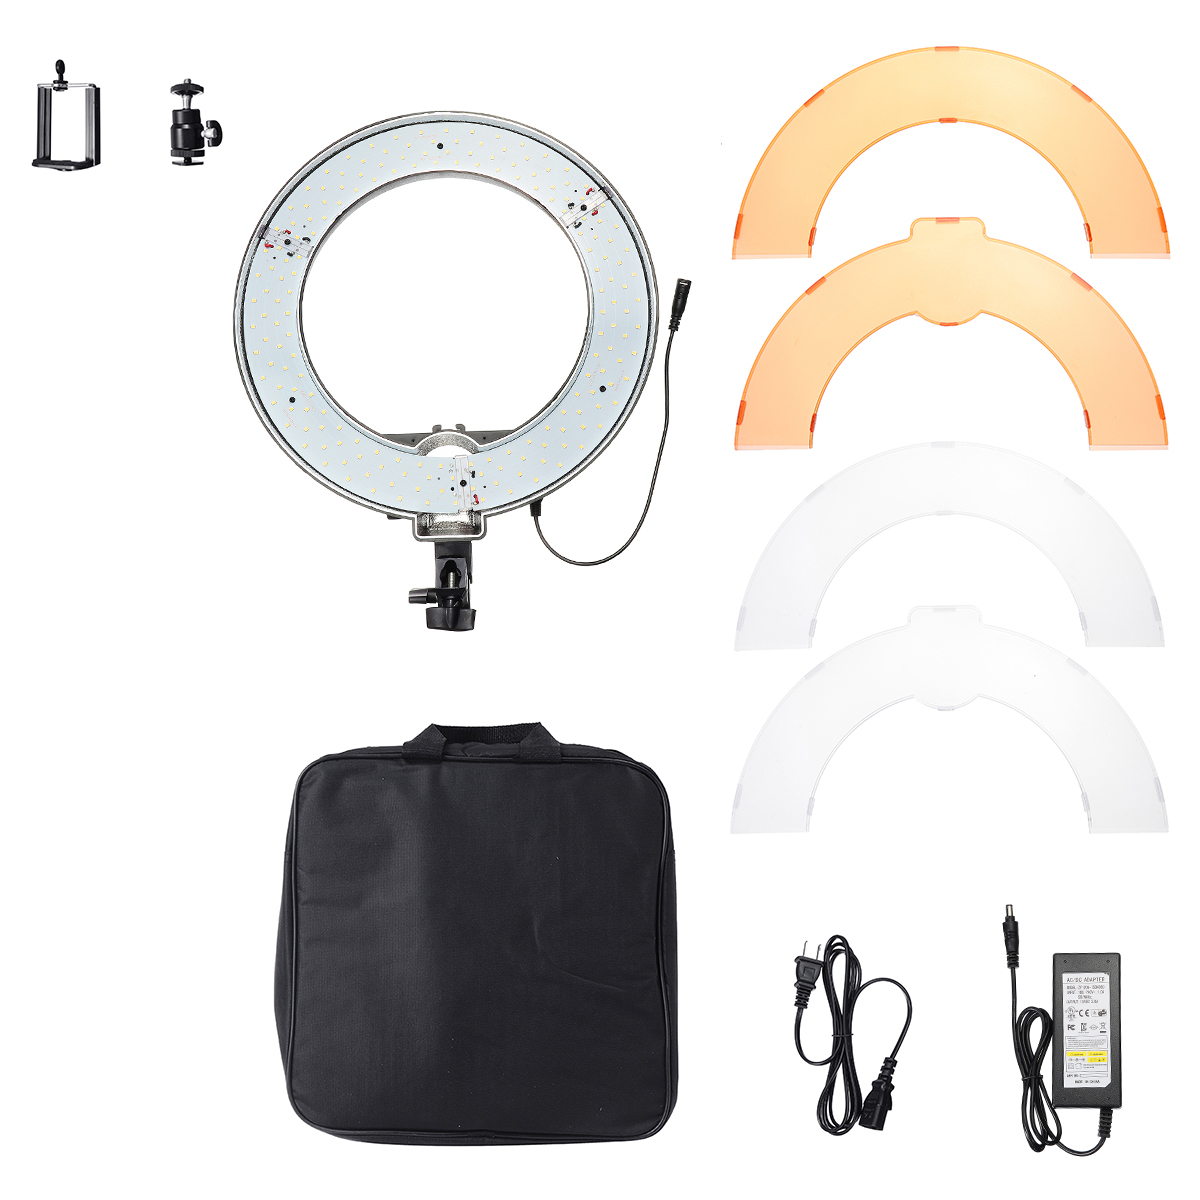 12-Inch-Dimmable-LED-Video-Ring-Light-with-Diffuser-Tripod-Stand-Holder-for-Youtube-Tik-Tok-Live-Str-1639911-6